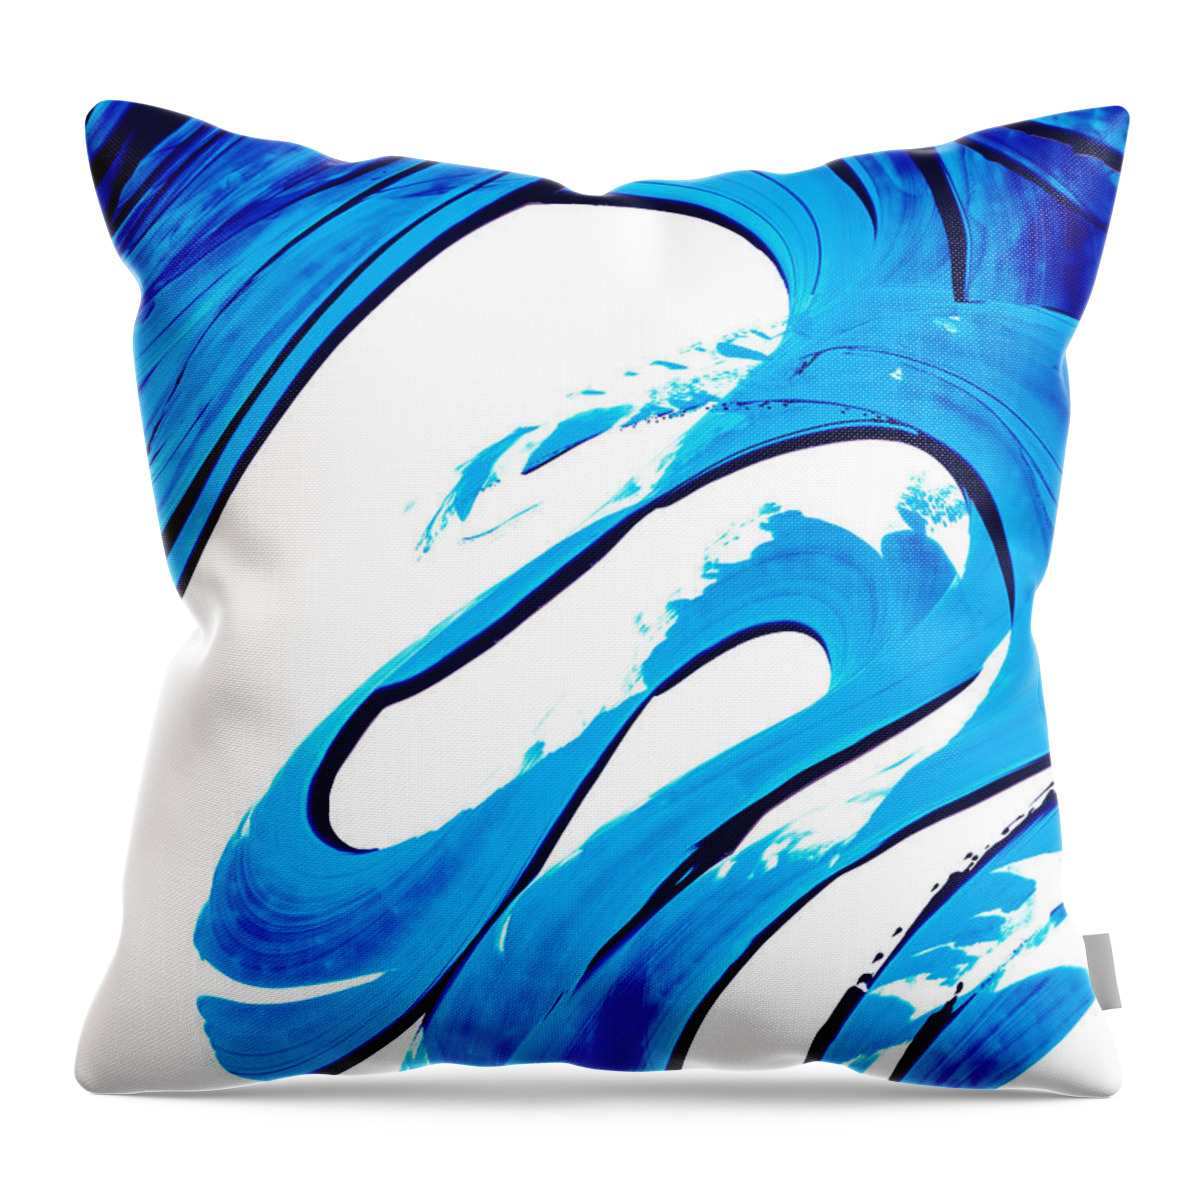 Abstracts Throw Pillow featuring the painting Pure Water 315 - Blue Abstract Art by Sharon Cummings by Sharon Cummings